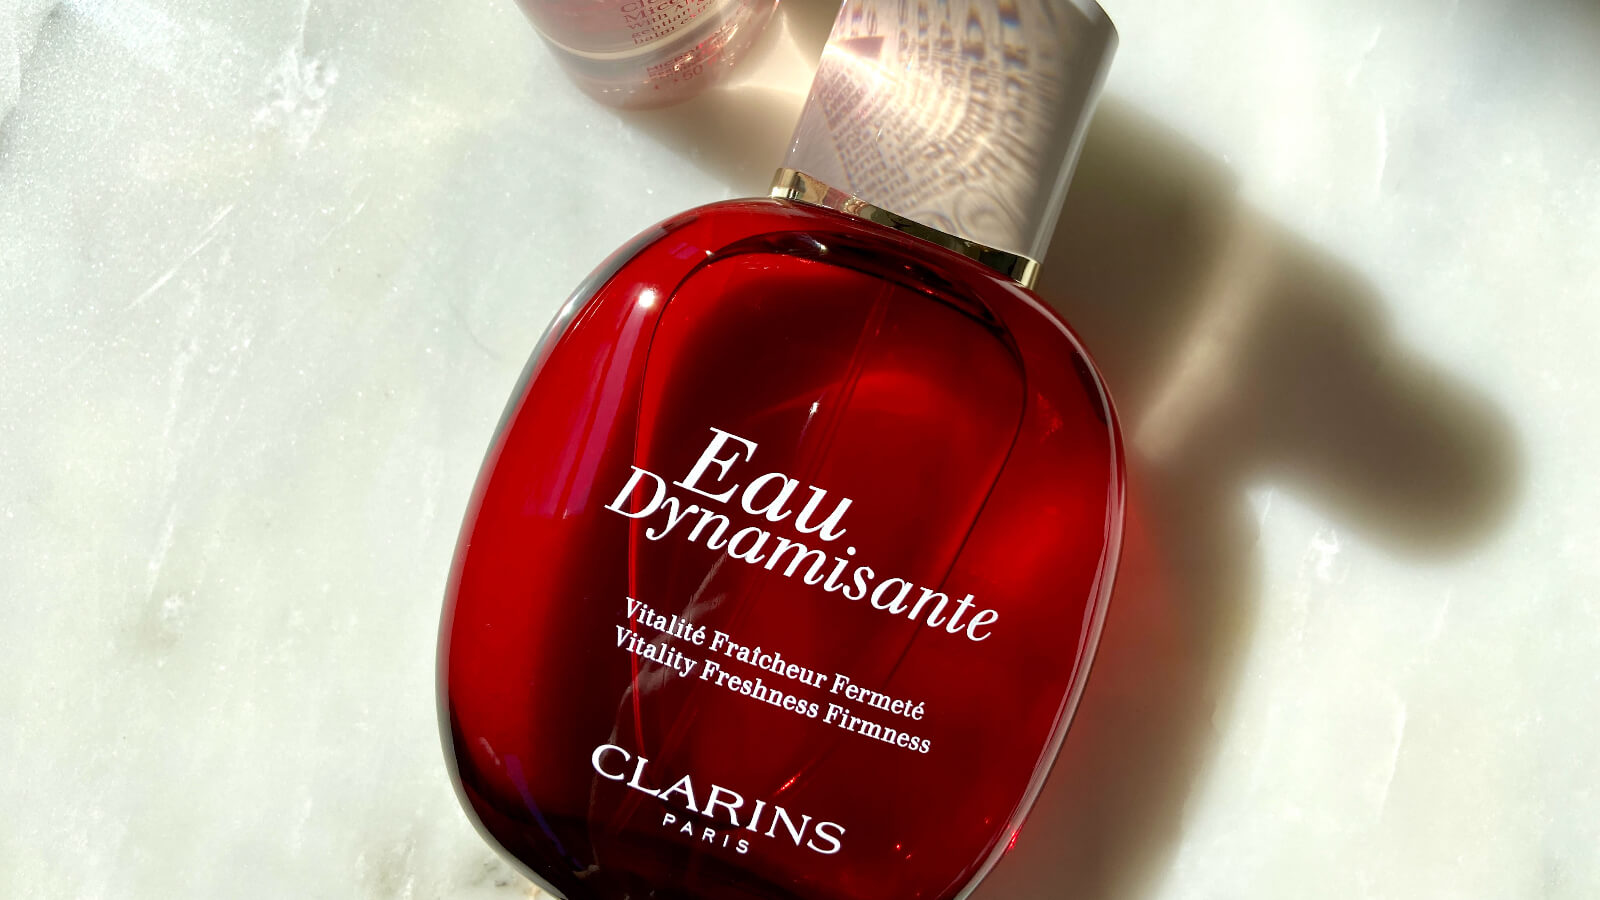 Løs skuffe Peru The 10 Best Clarins Products to Add to Your Routine